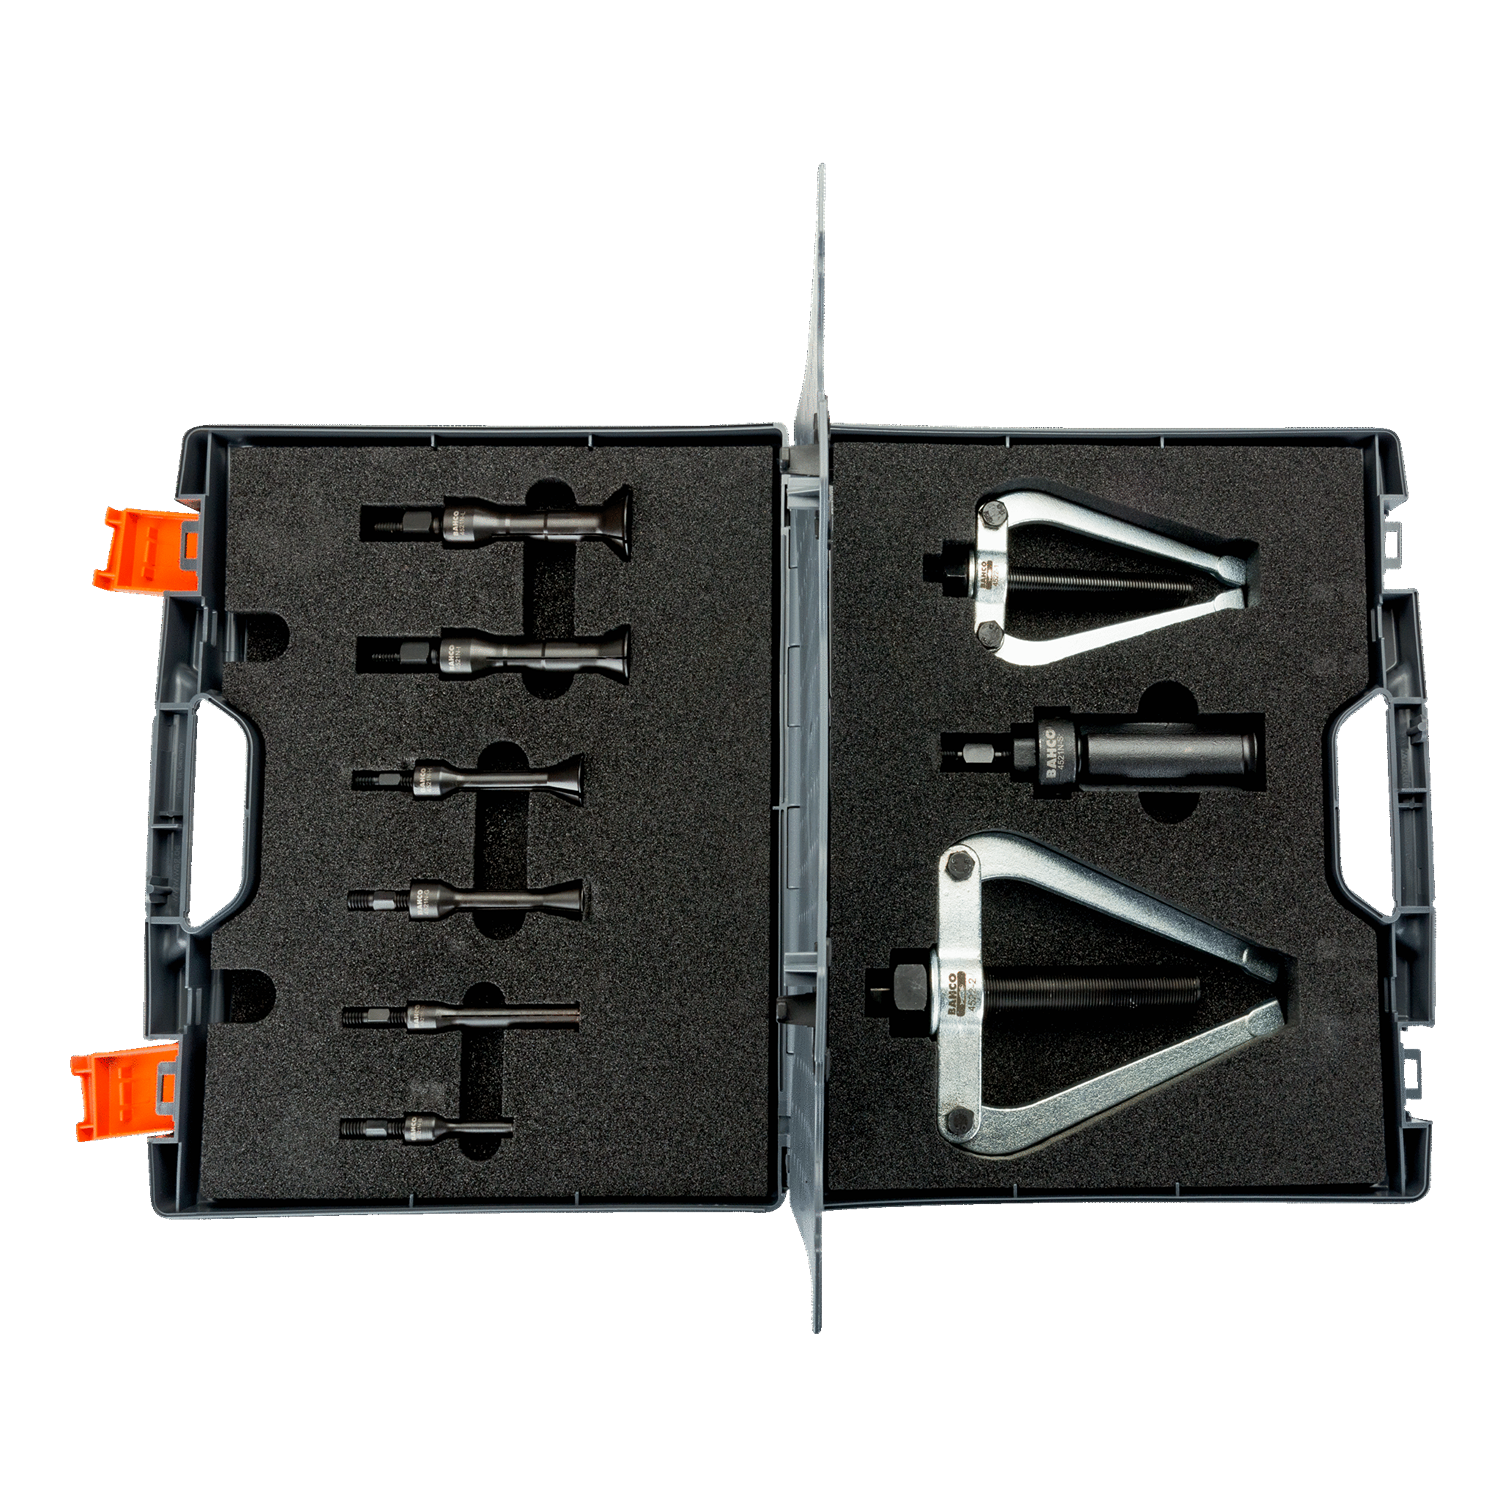 BAHCO 4521N/7 Complete Workshop Puller Set Assortment - 9 Pcs - Premium Workshop Puller Set from BAHCO - Shop now at Yew Aik.